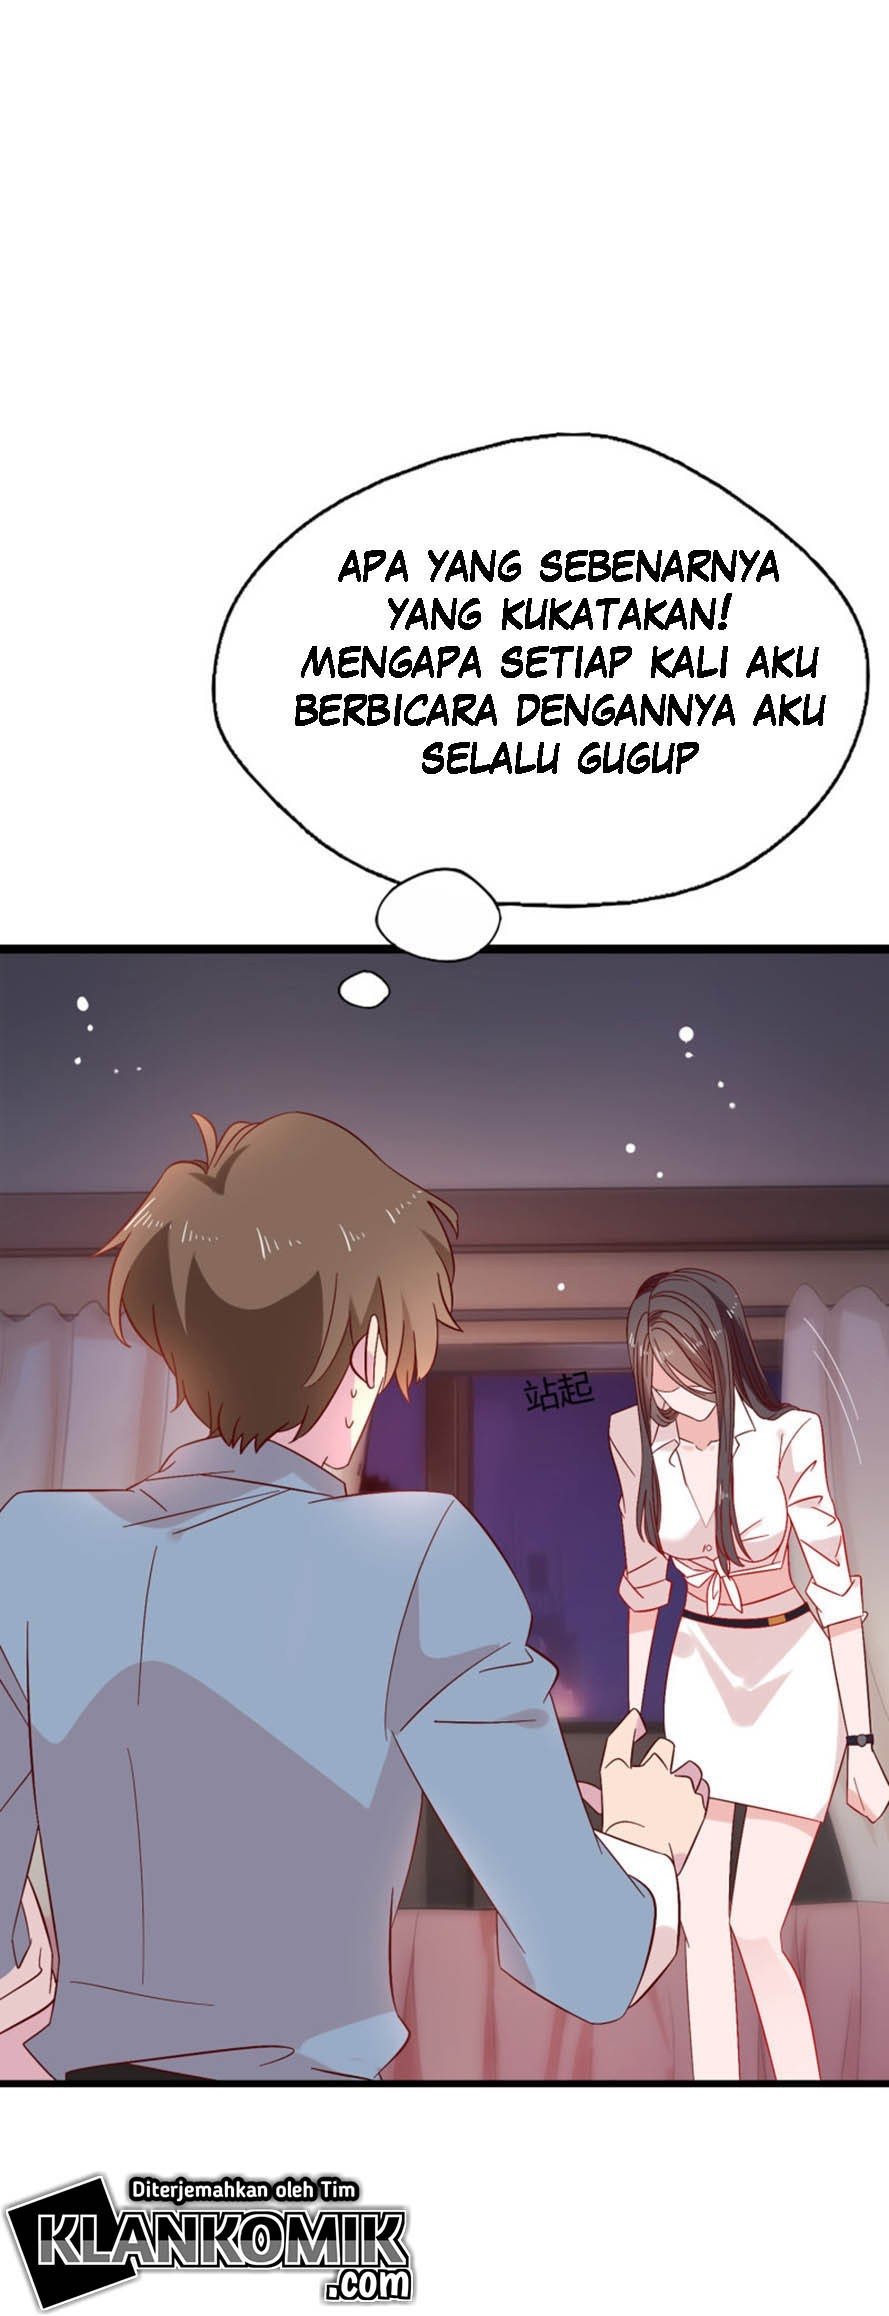 Beautiful Boss Cold-Hearted Chapter 05